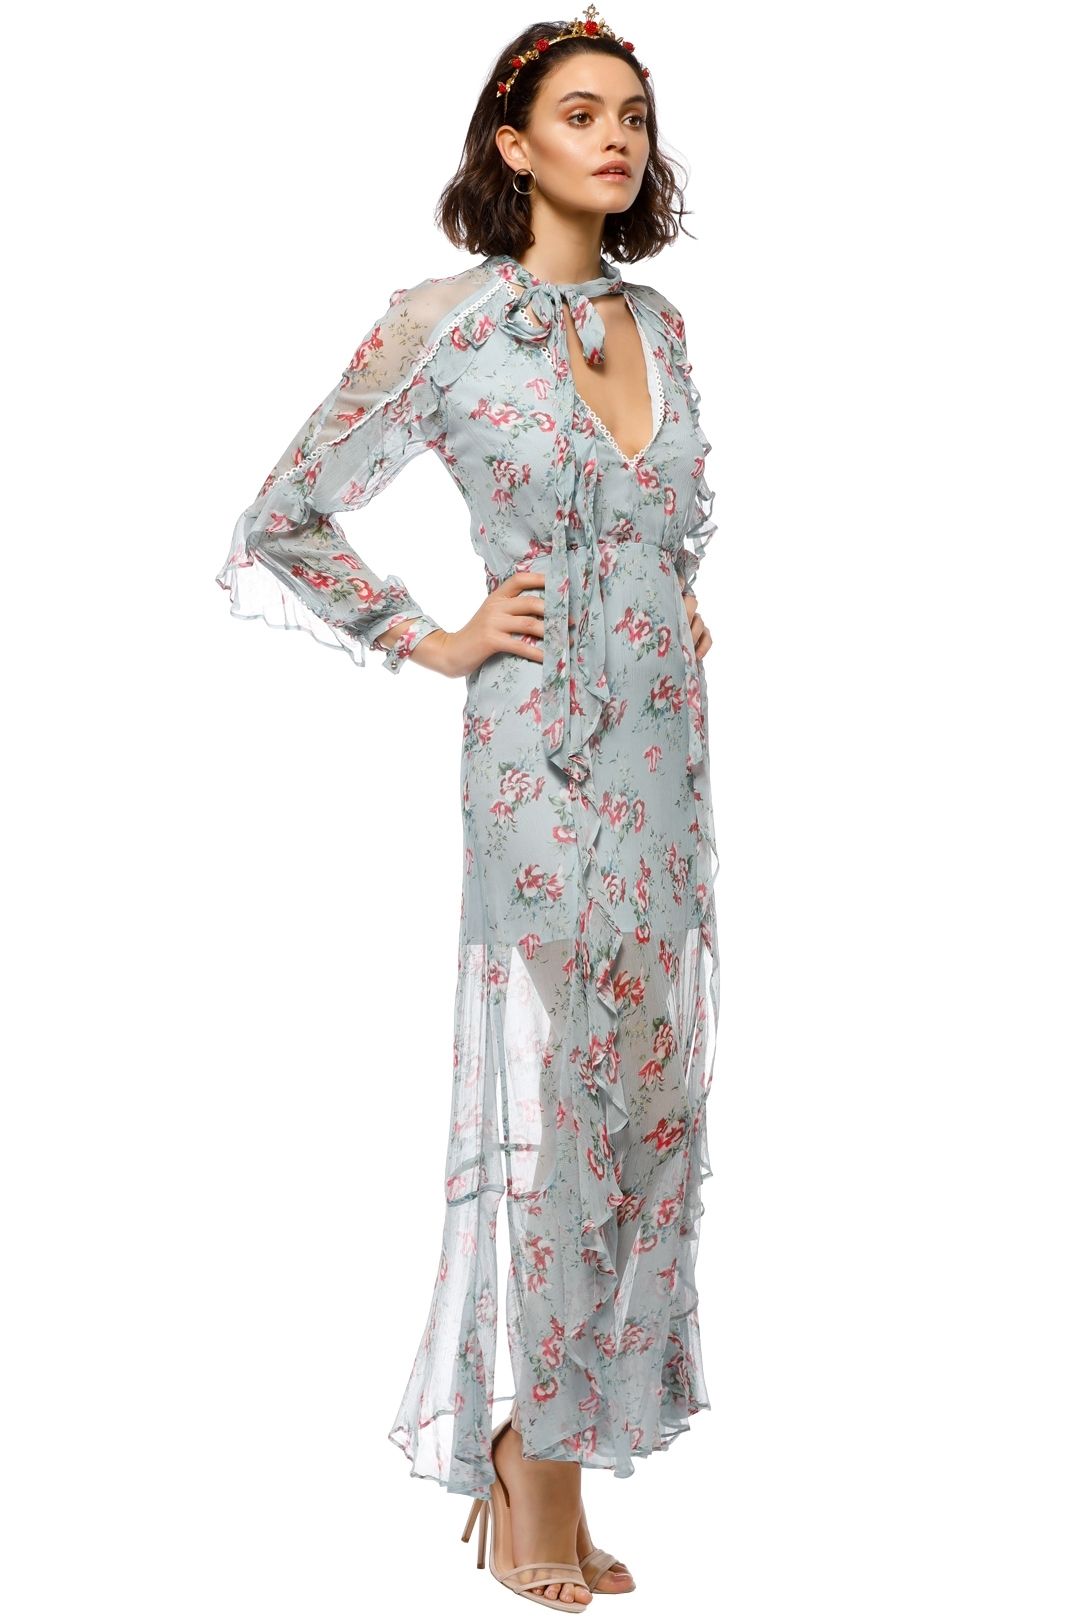 Talulah - The Knowing Midi Dress - Blue Floral - Side